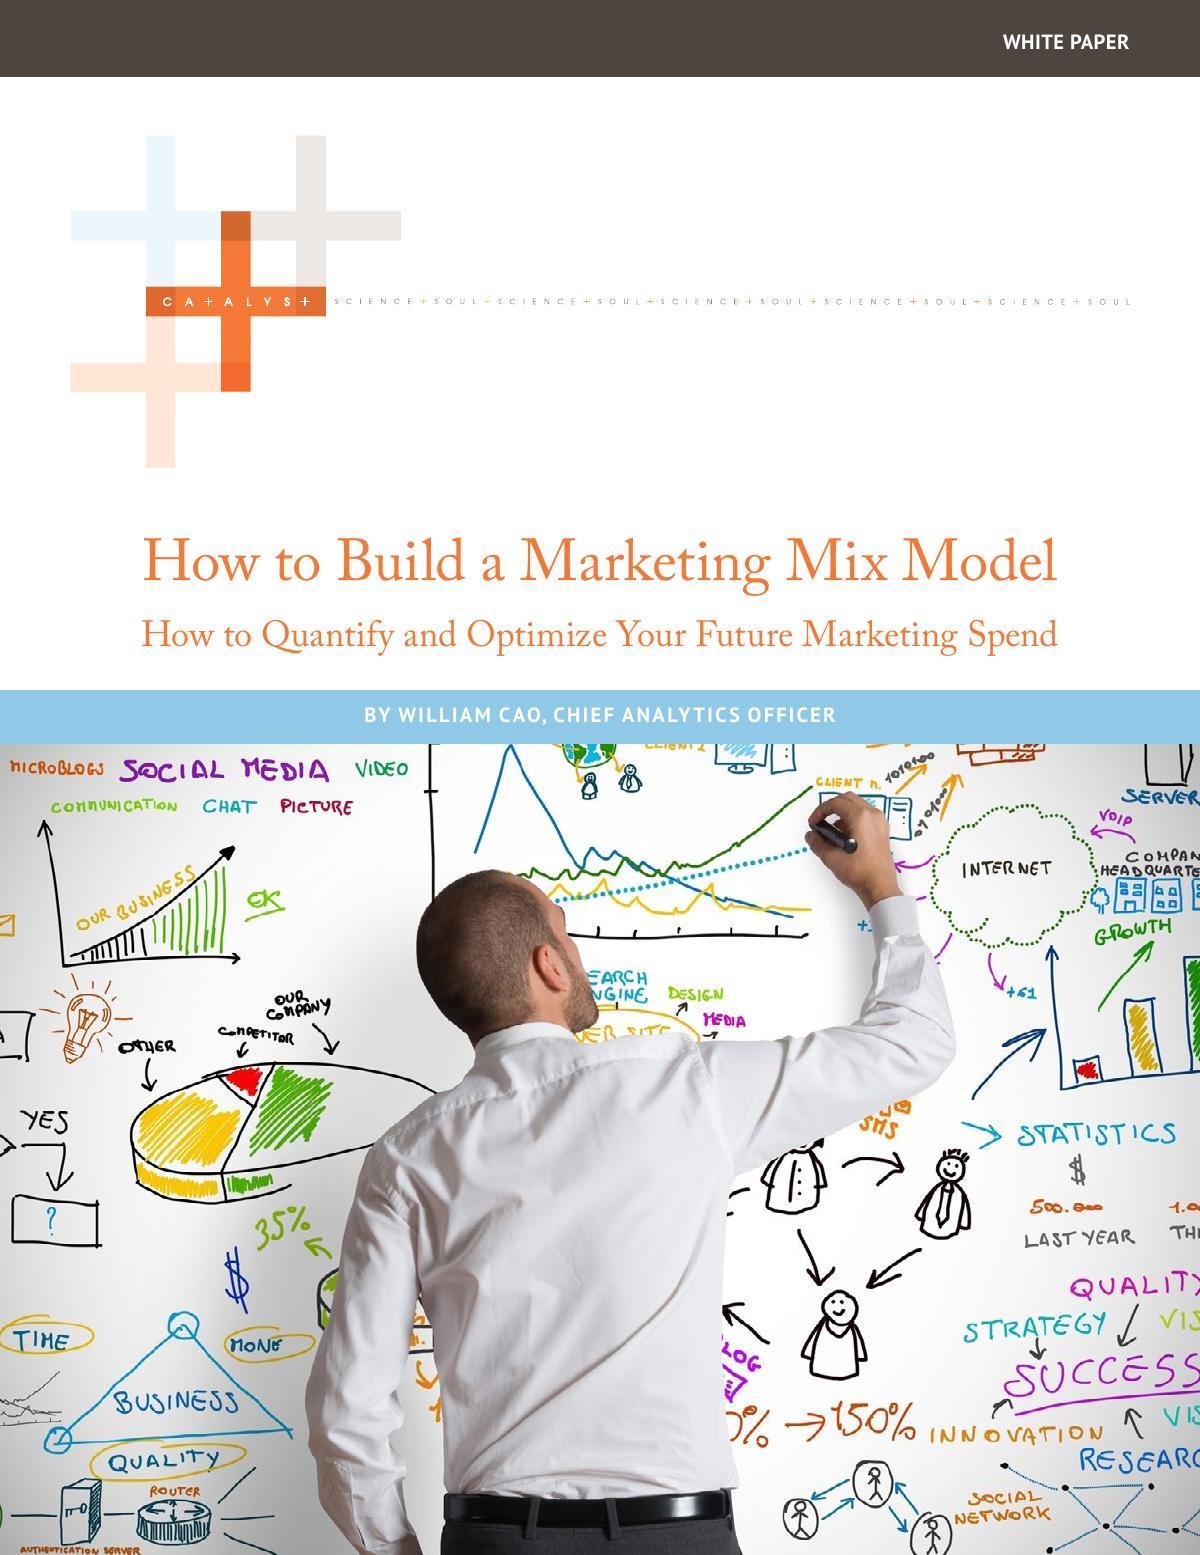 Marketing Mix Modeling: What it is, Why you need it, and how to do it